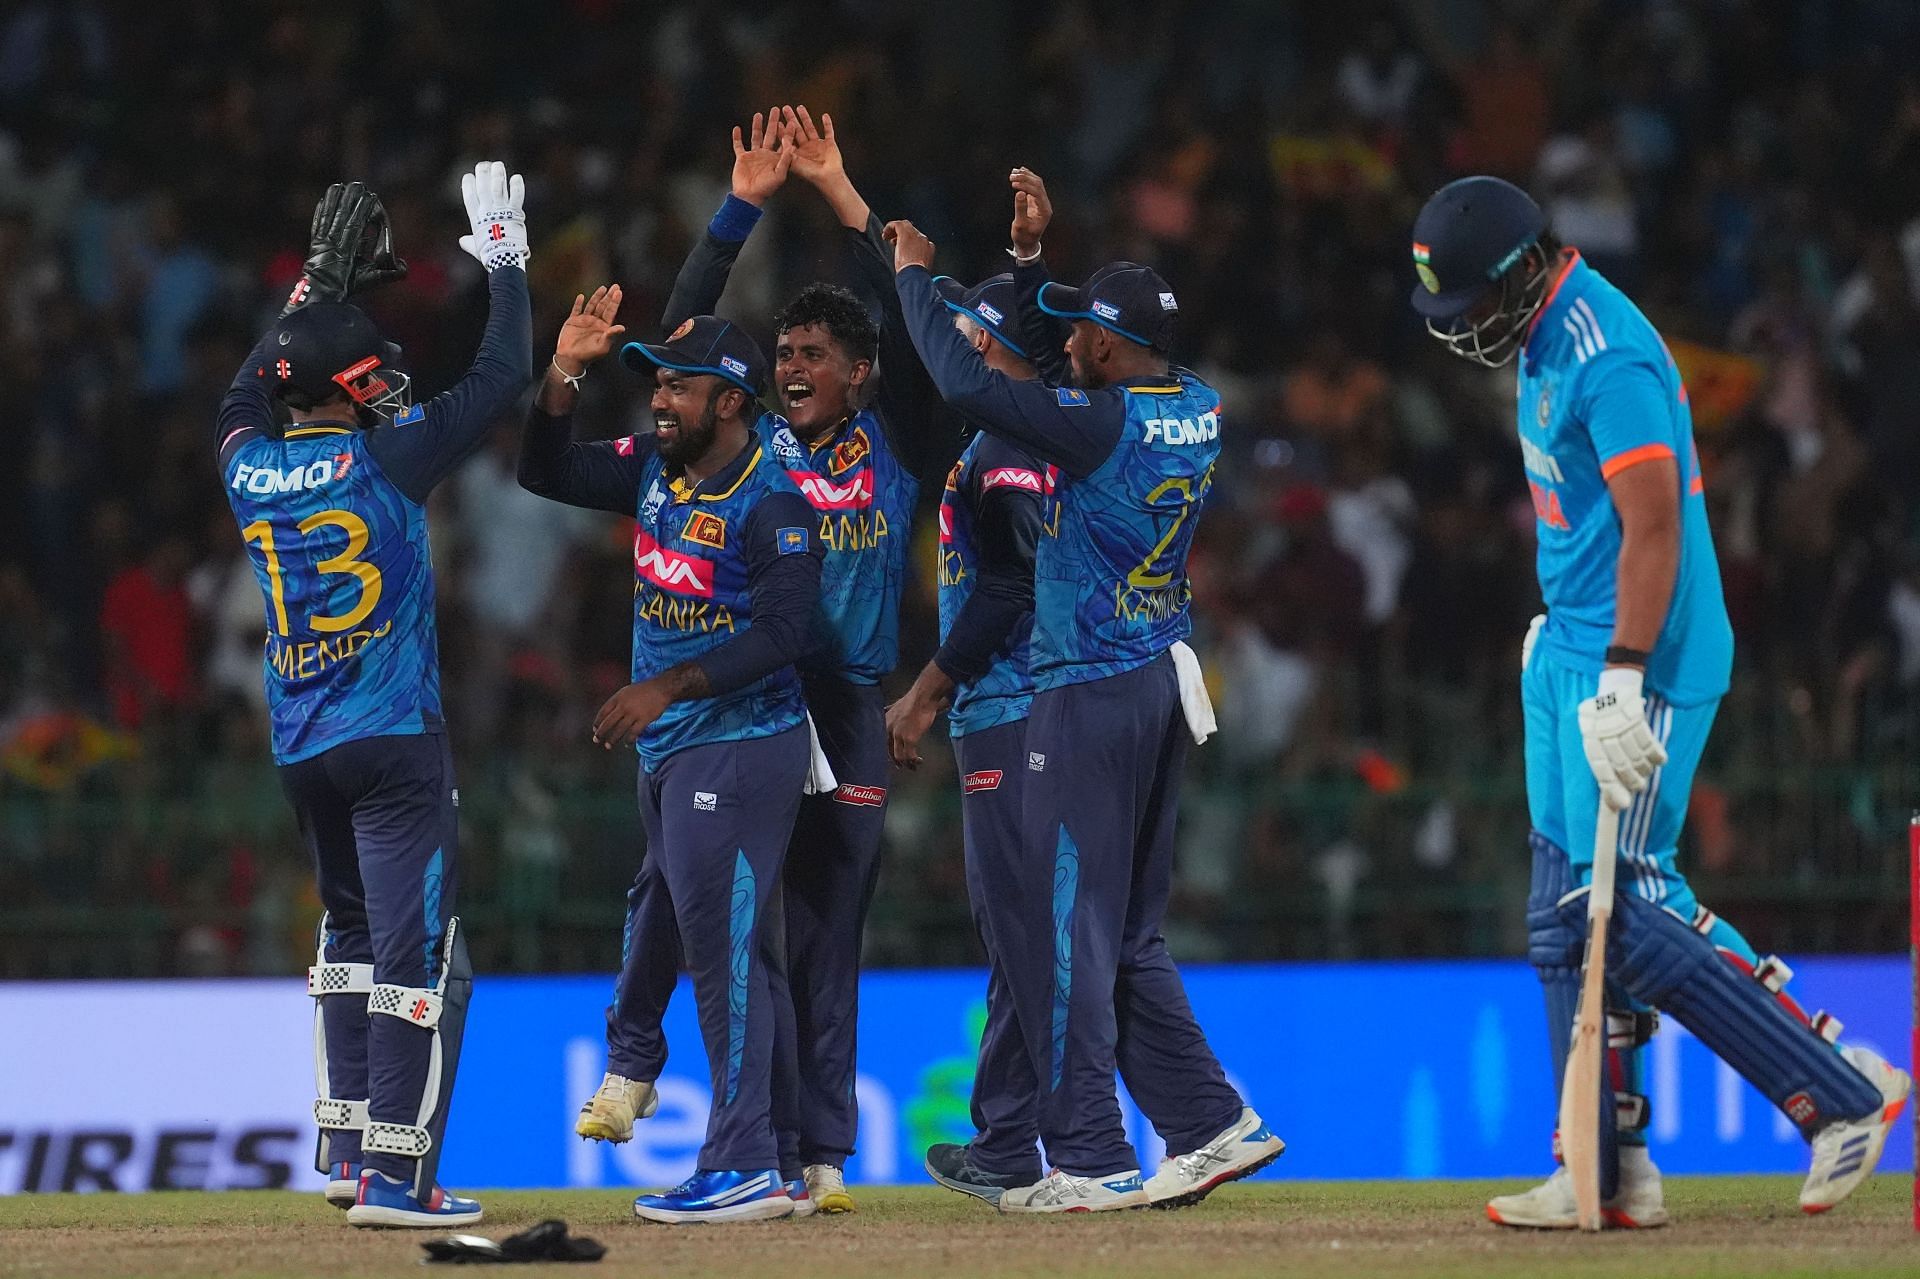 Who said what - Top 3 expert reactions to India's loss to Sri Lanka in 2nd ODI ft. Aakash Chopra